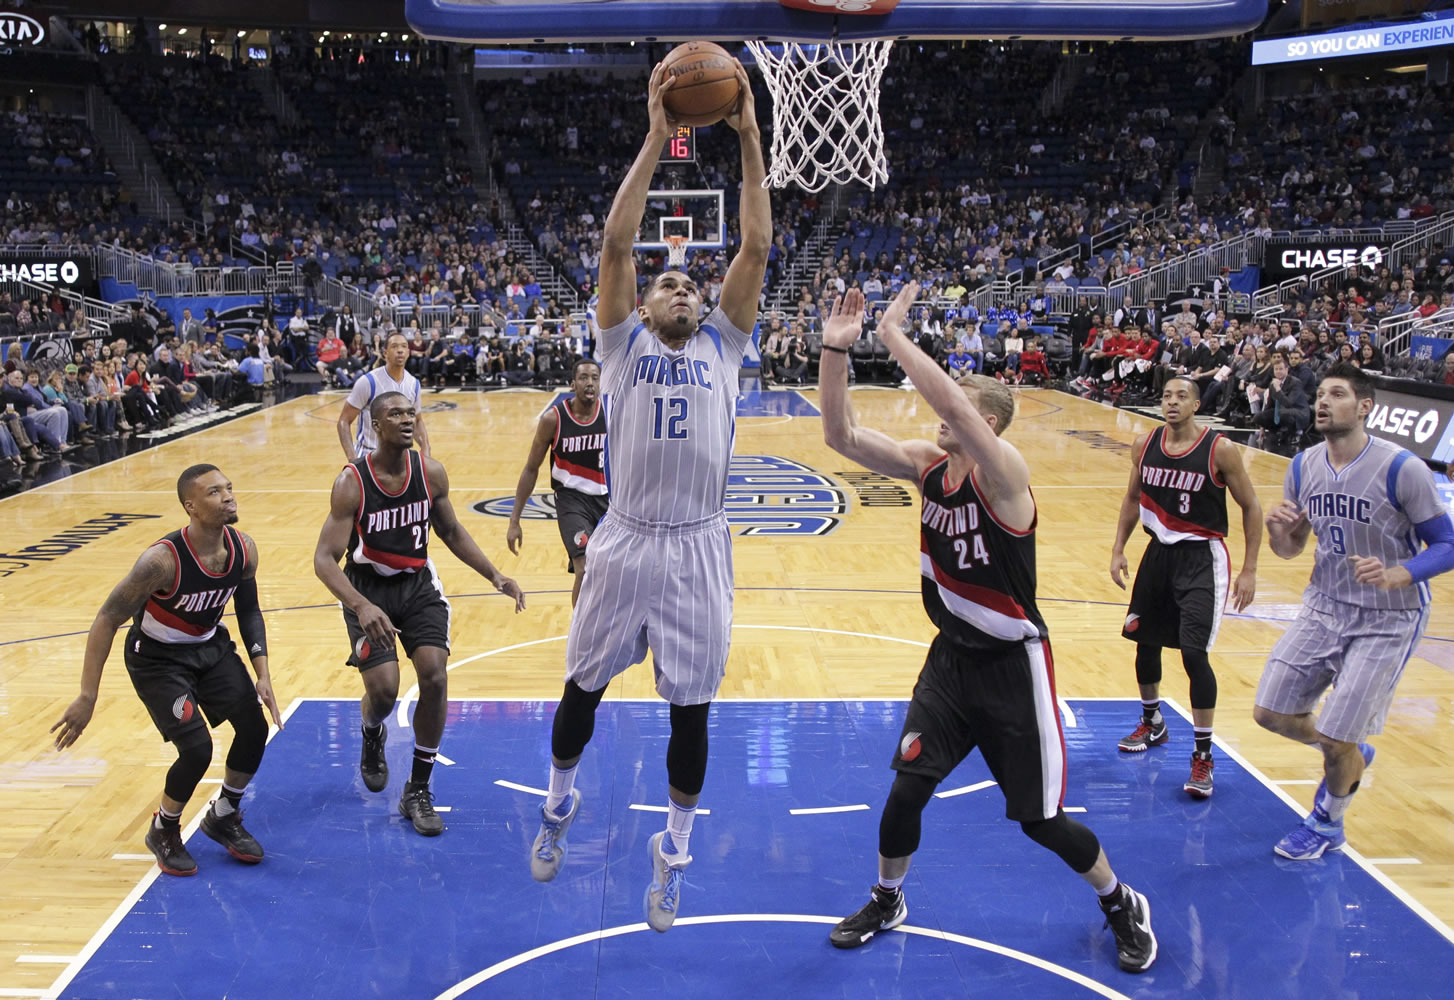 Orlando Magic&#039;s Tobias Harris (12) gets past the Portland Trail Blazers defense for a shot during the first half of an NBA basketball game, Friday, Dec. 18, 2015, in Orlando, Fla.